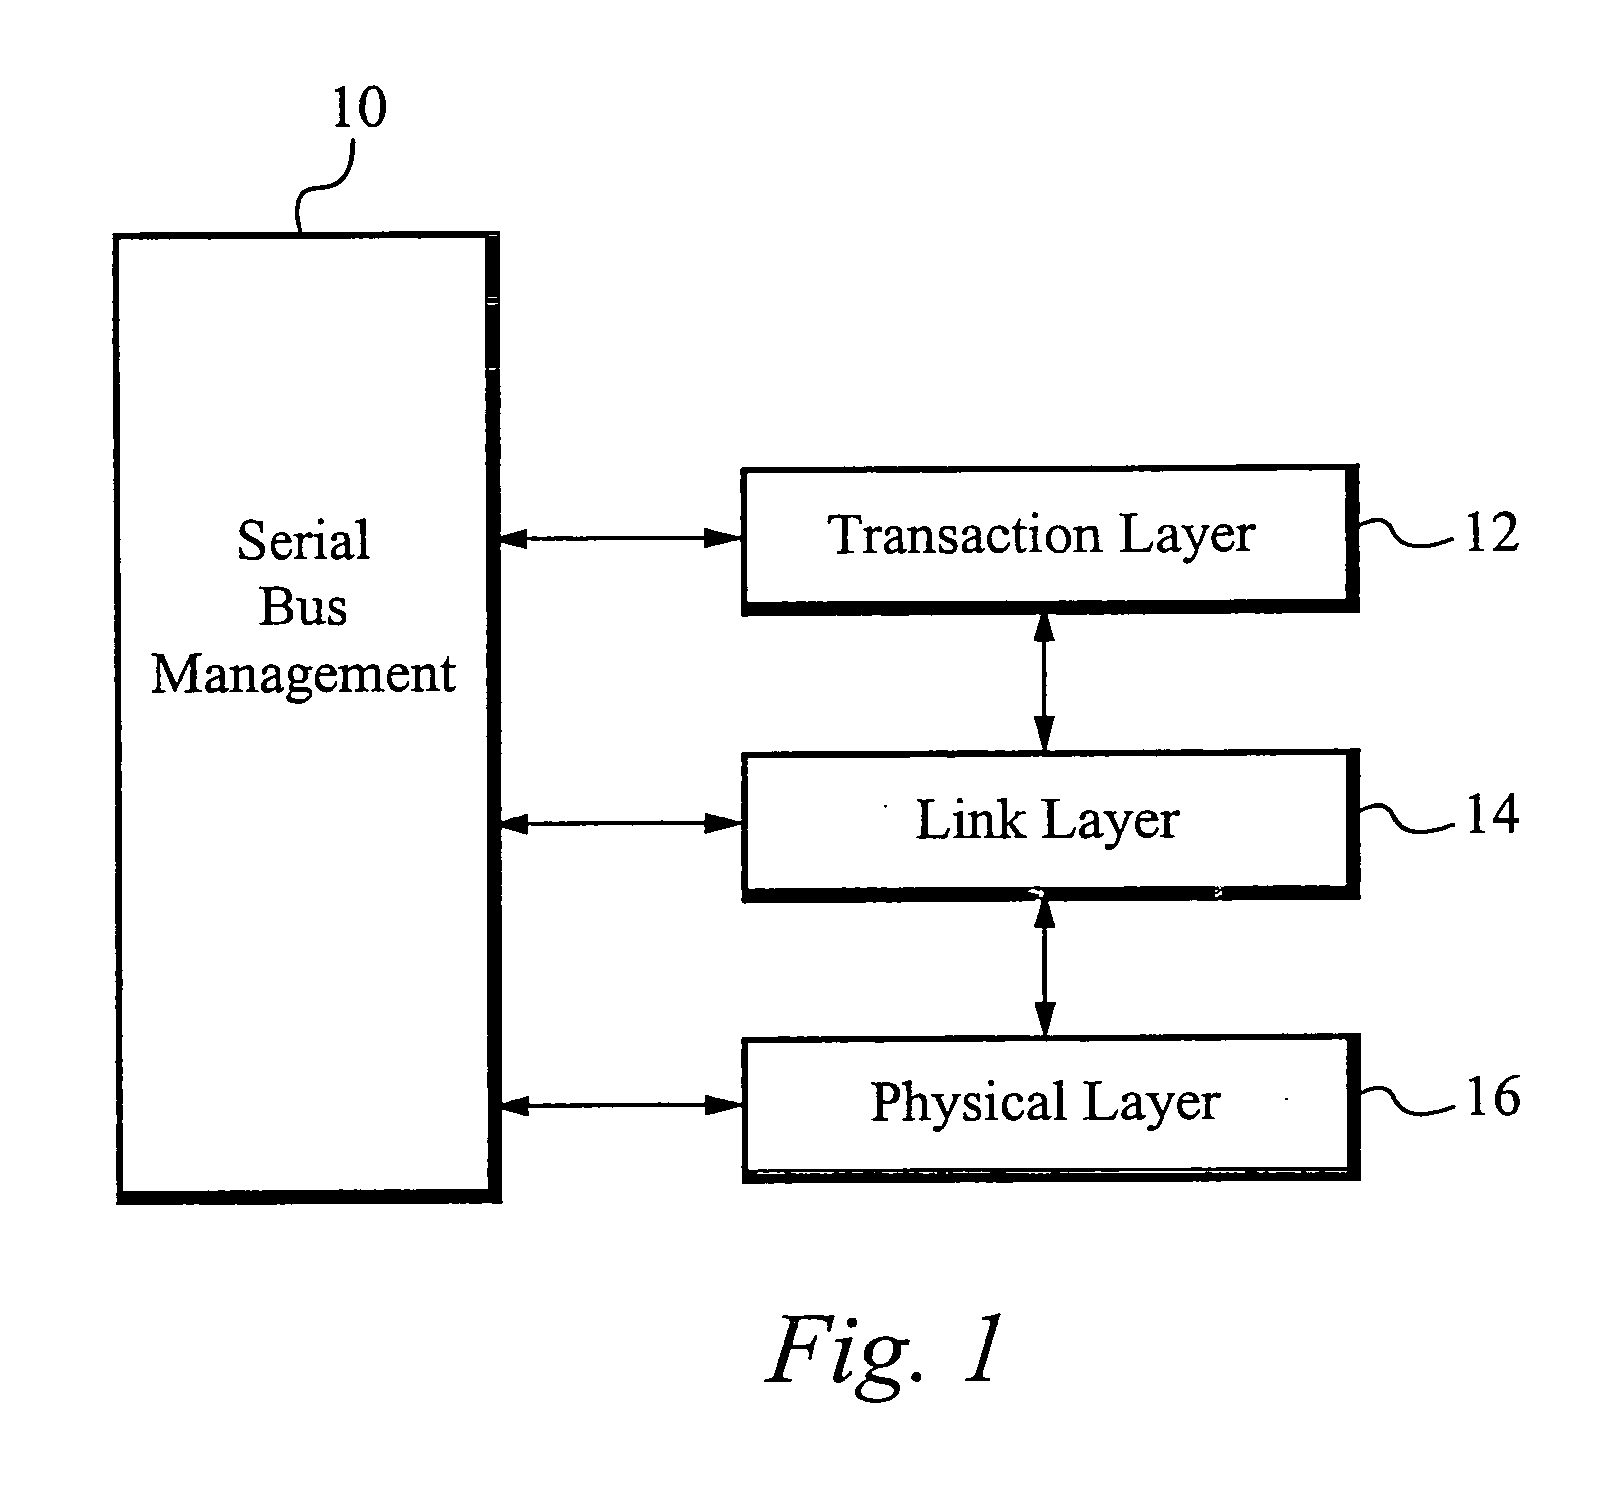 Application programming interface for data transfer and bus management over a bus structure